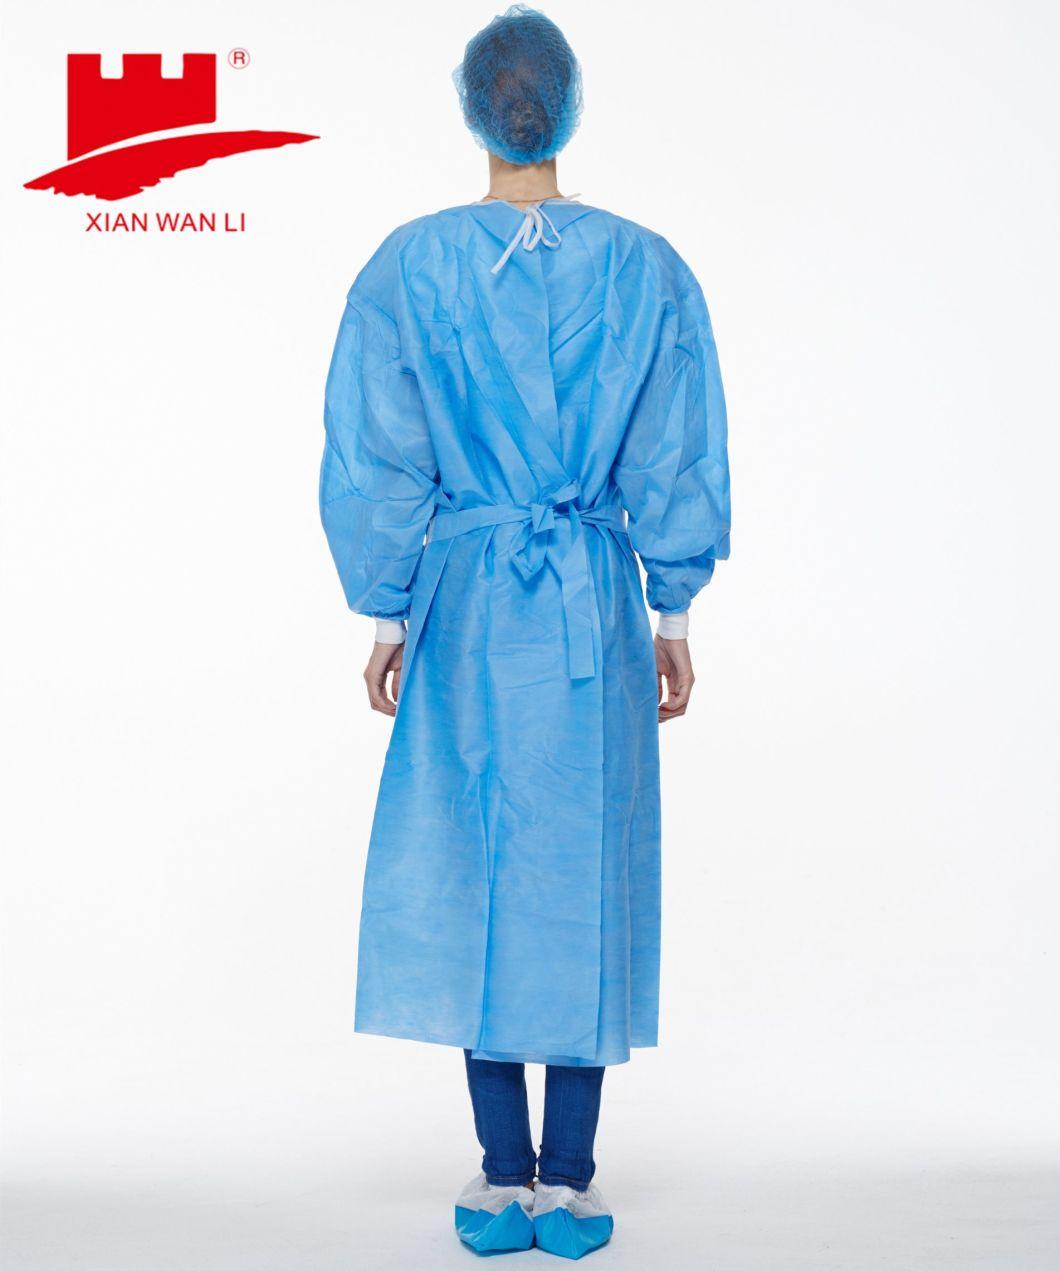 Disposable Isolation Gowns En13795 Surgical Gown Level 3